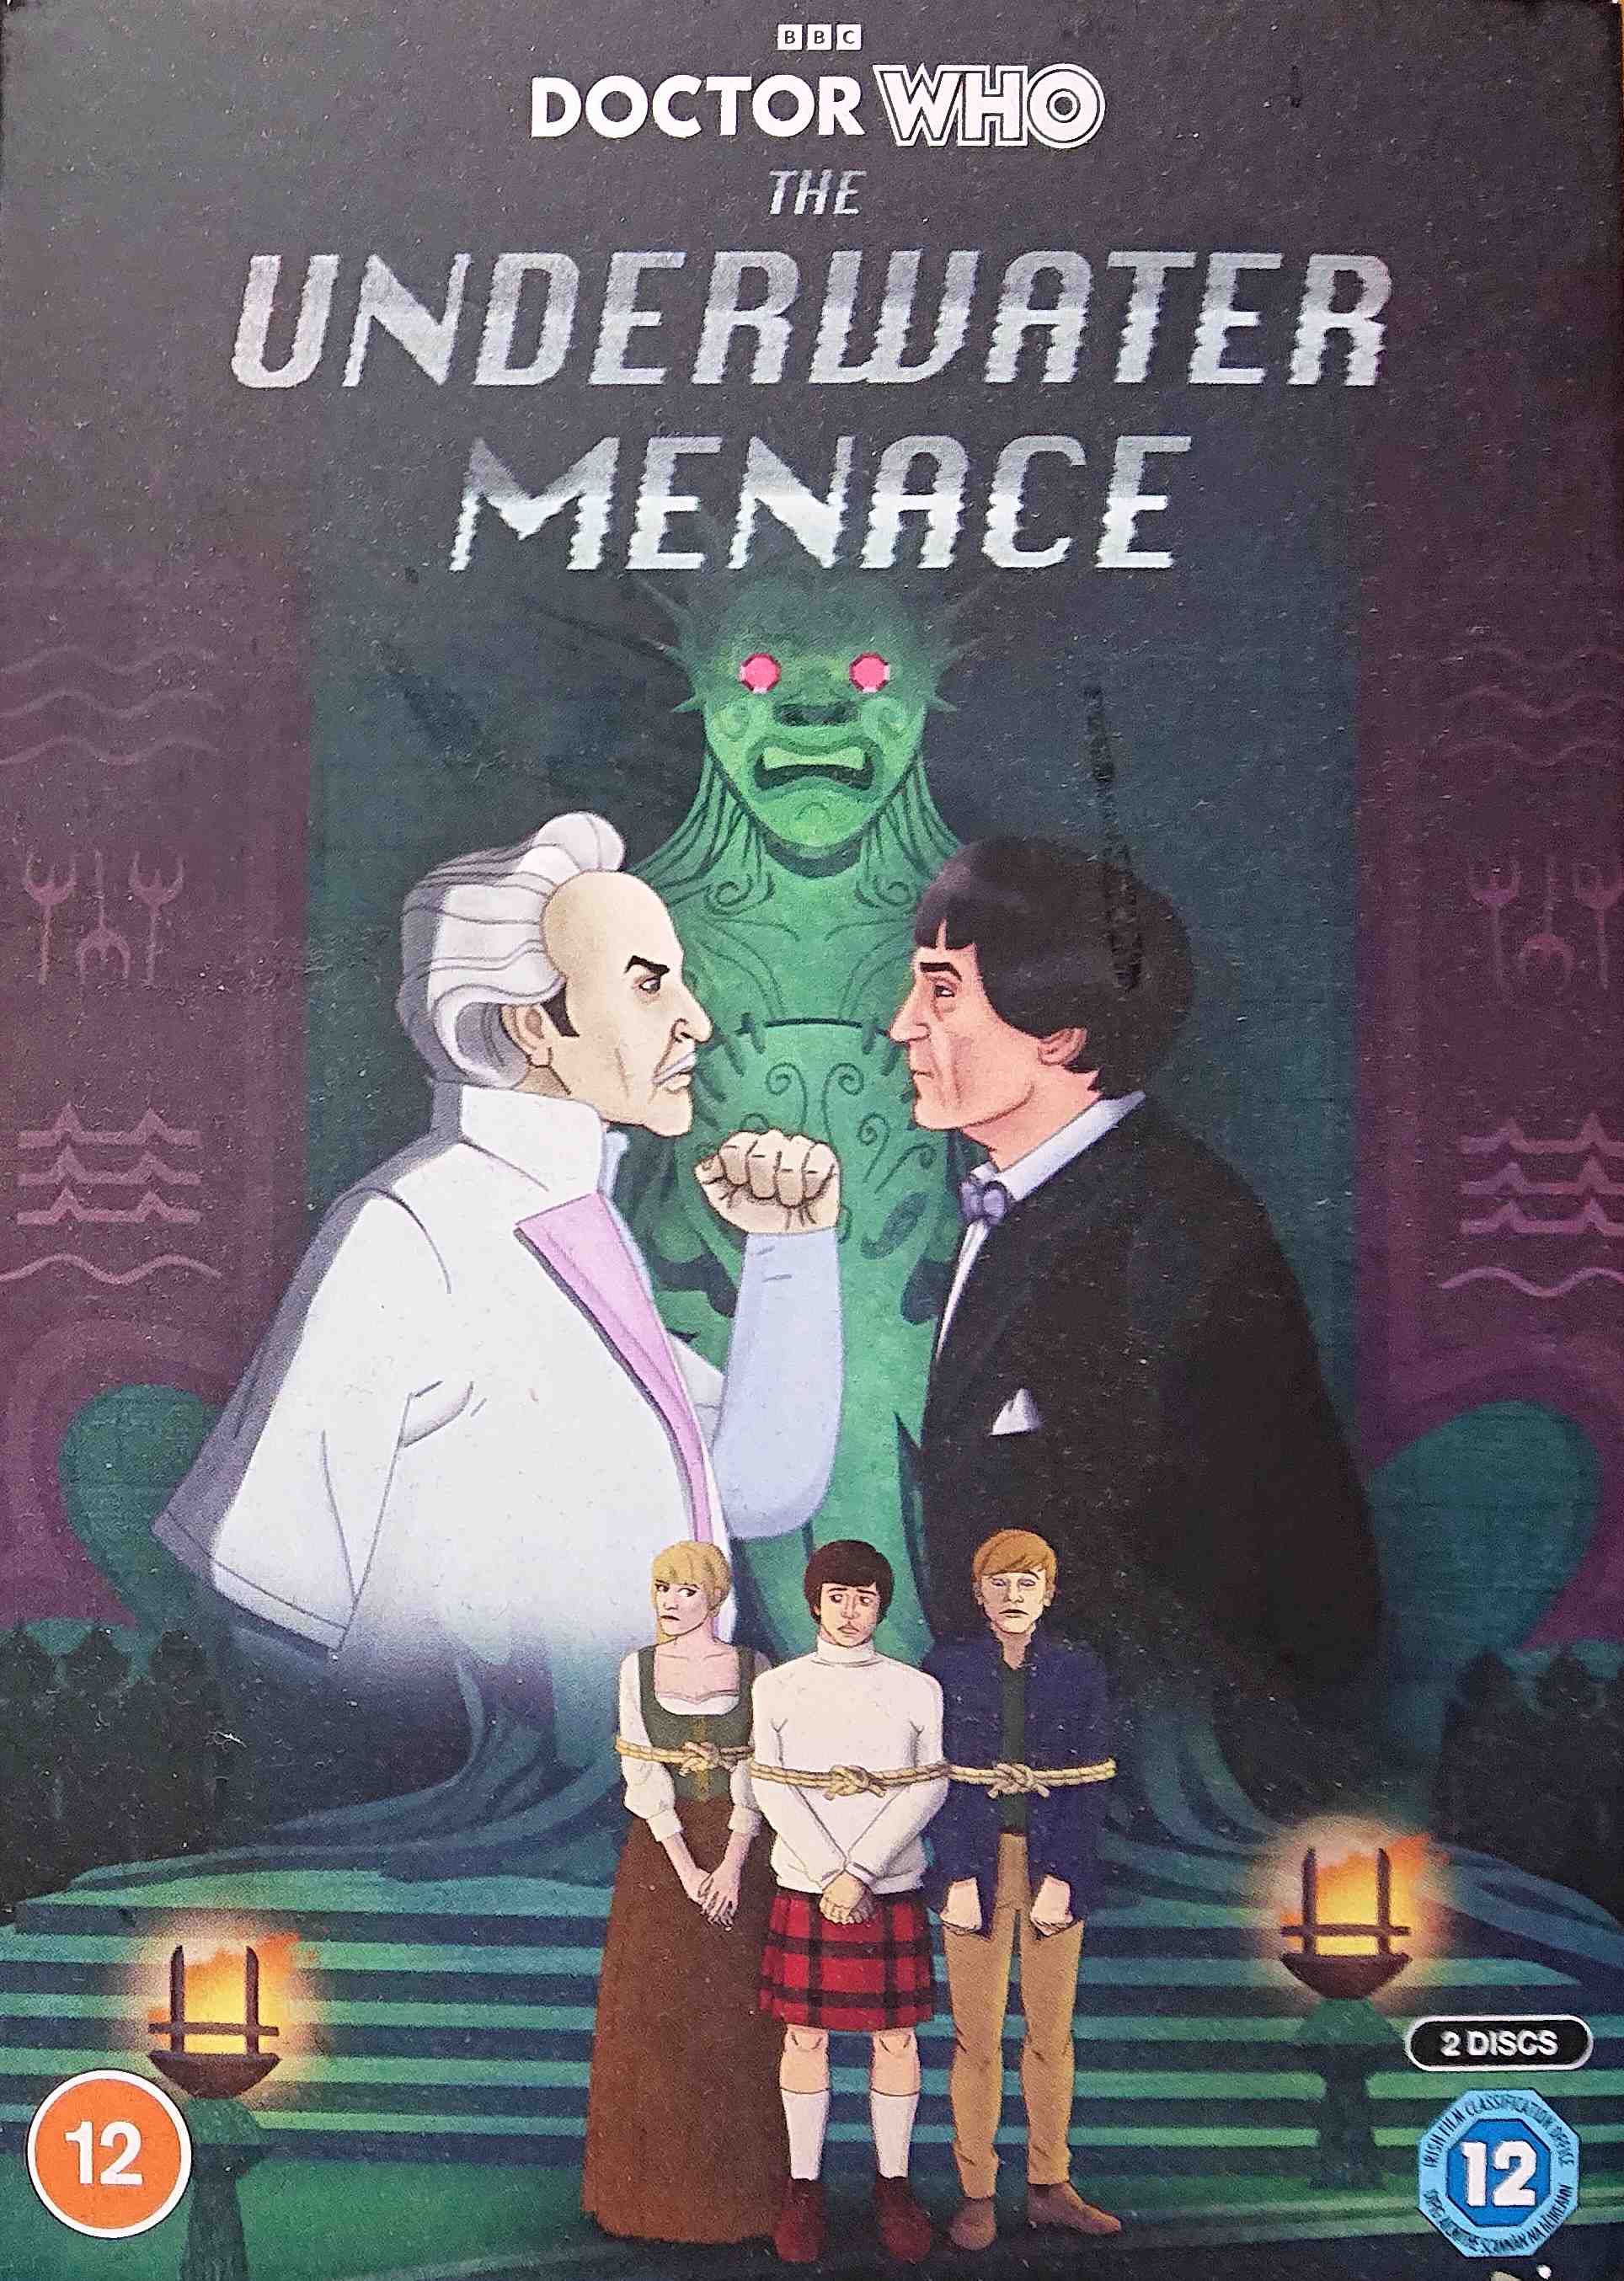 Picture of Doctor Who - The underwater menace by artist Geoffrey Orme from the BBC dvds - Records and Tapes library